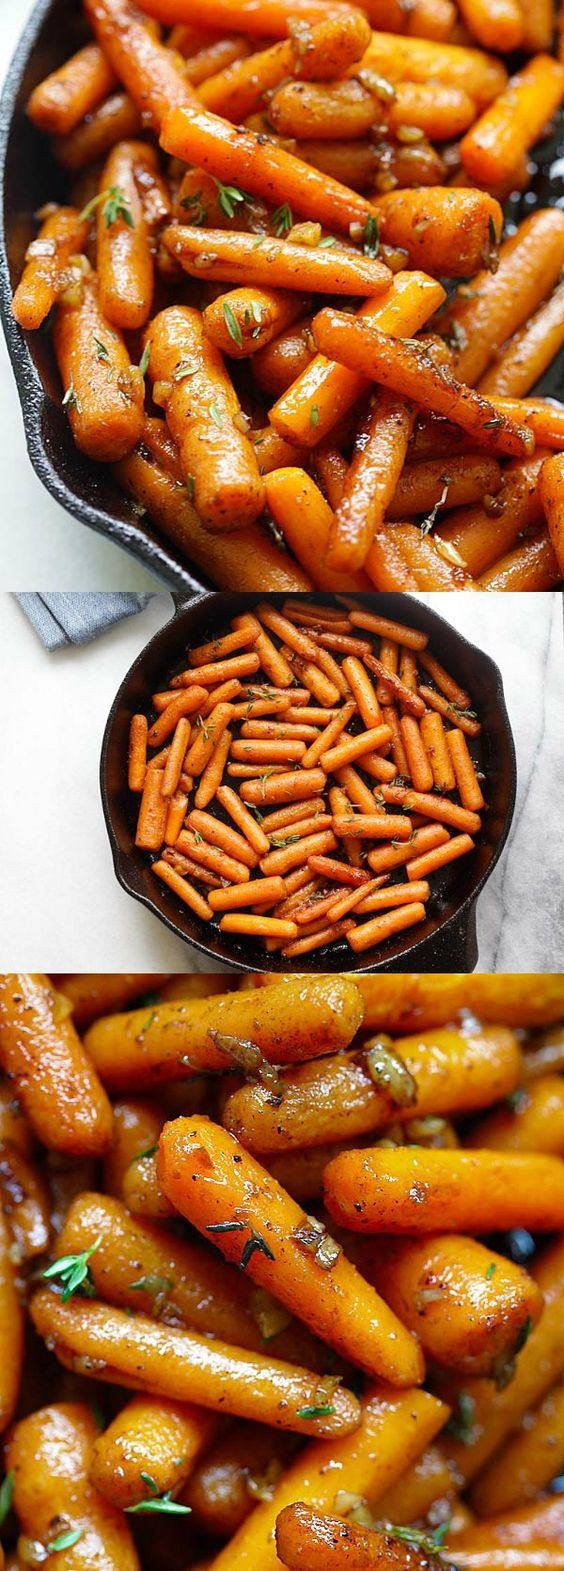 Vegetable Side Dishes For Thanksgiving
 50 Best Thanksgiving Ve able Side Dishes 2017